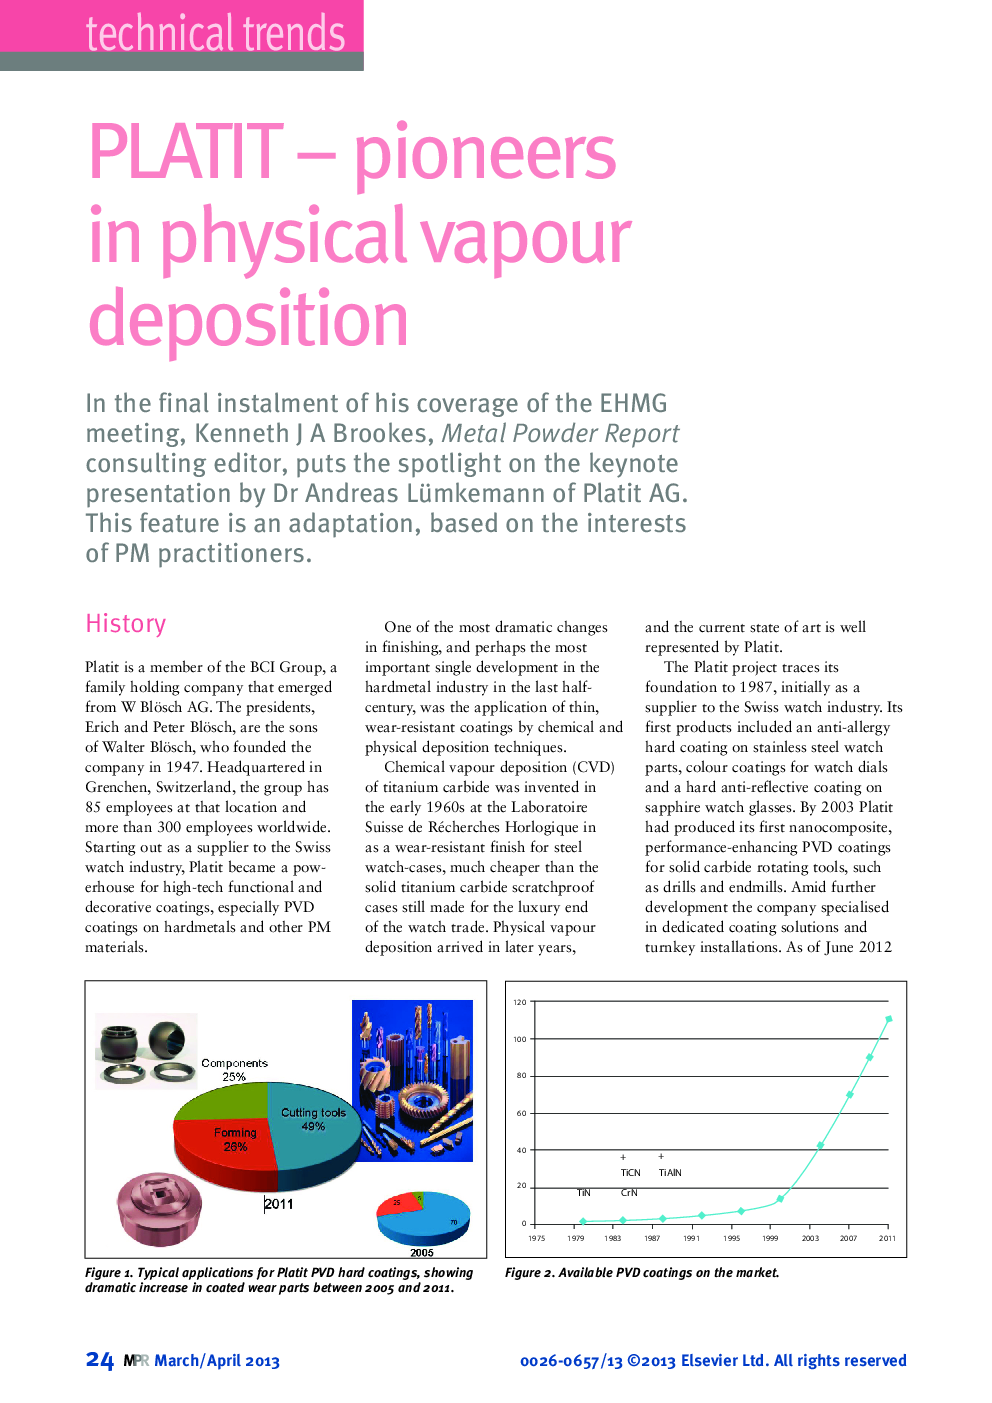 PLATIT - pioneers in physical vapour deposition